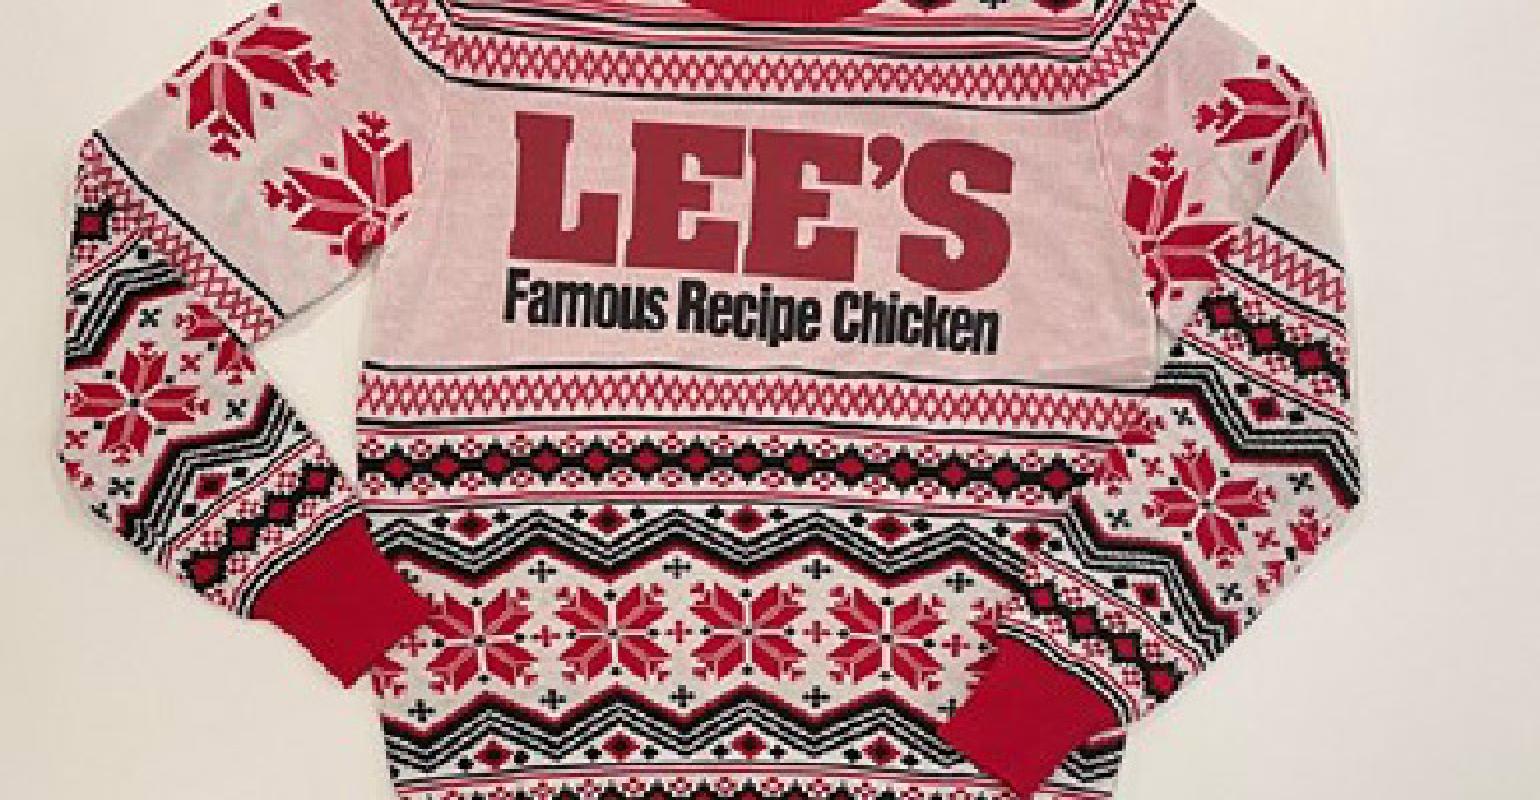 Lee's Famous Recipe Chicken limited edition ugly Christmas sweater |  Nation's Restaurant News